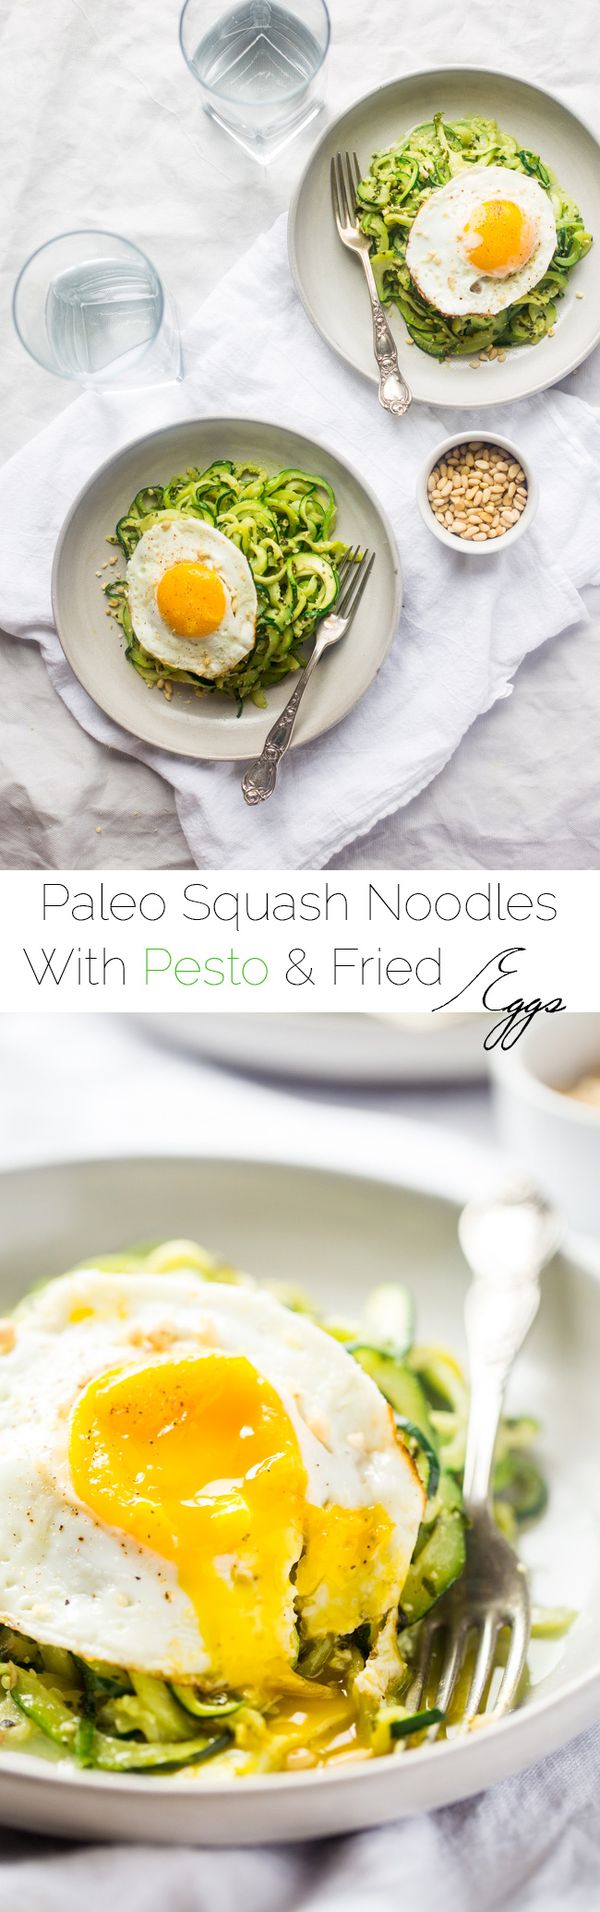 Paleo Zucchini Noodles with Everything Pesto and Fried Eggs